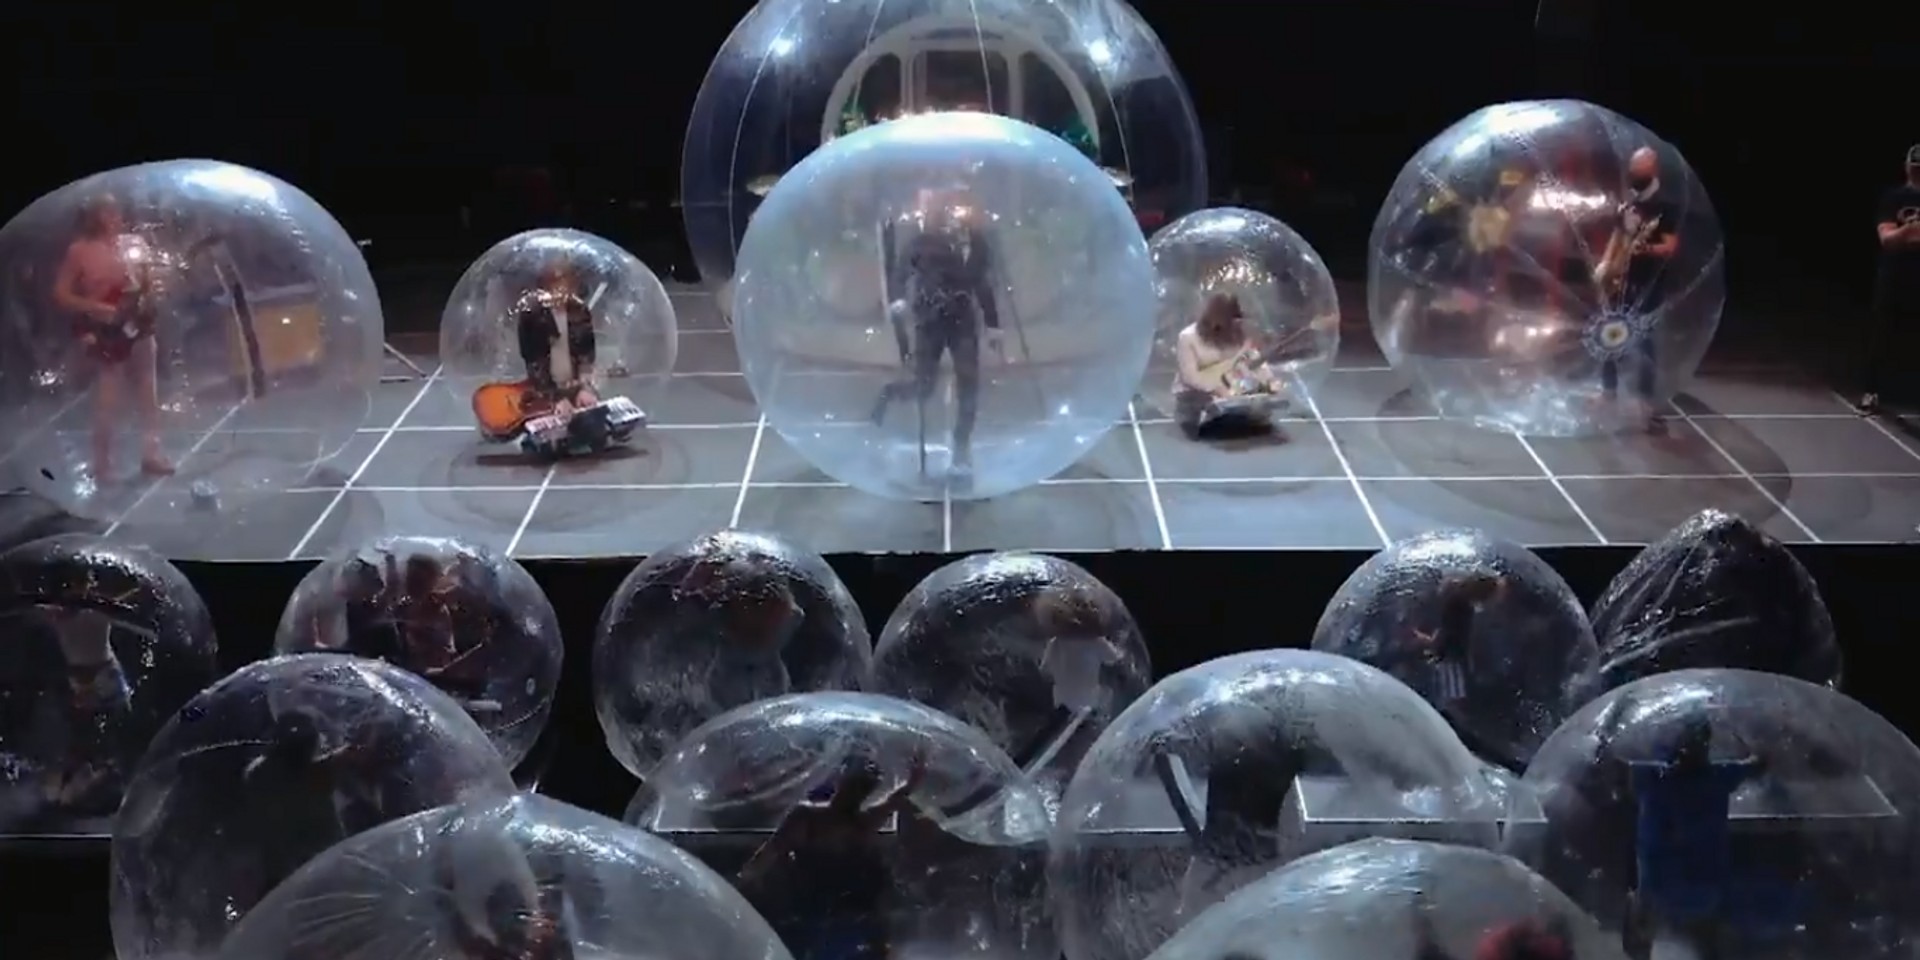 The Flaming Lips perform live in bubbles for The Late Show With Stephen Colbert 